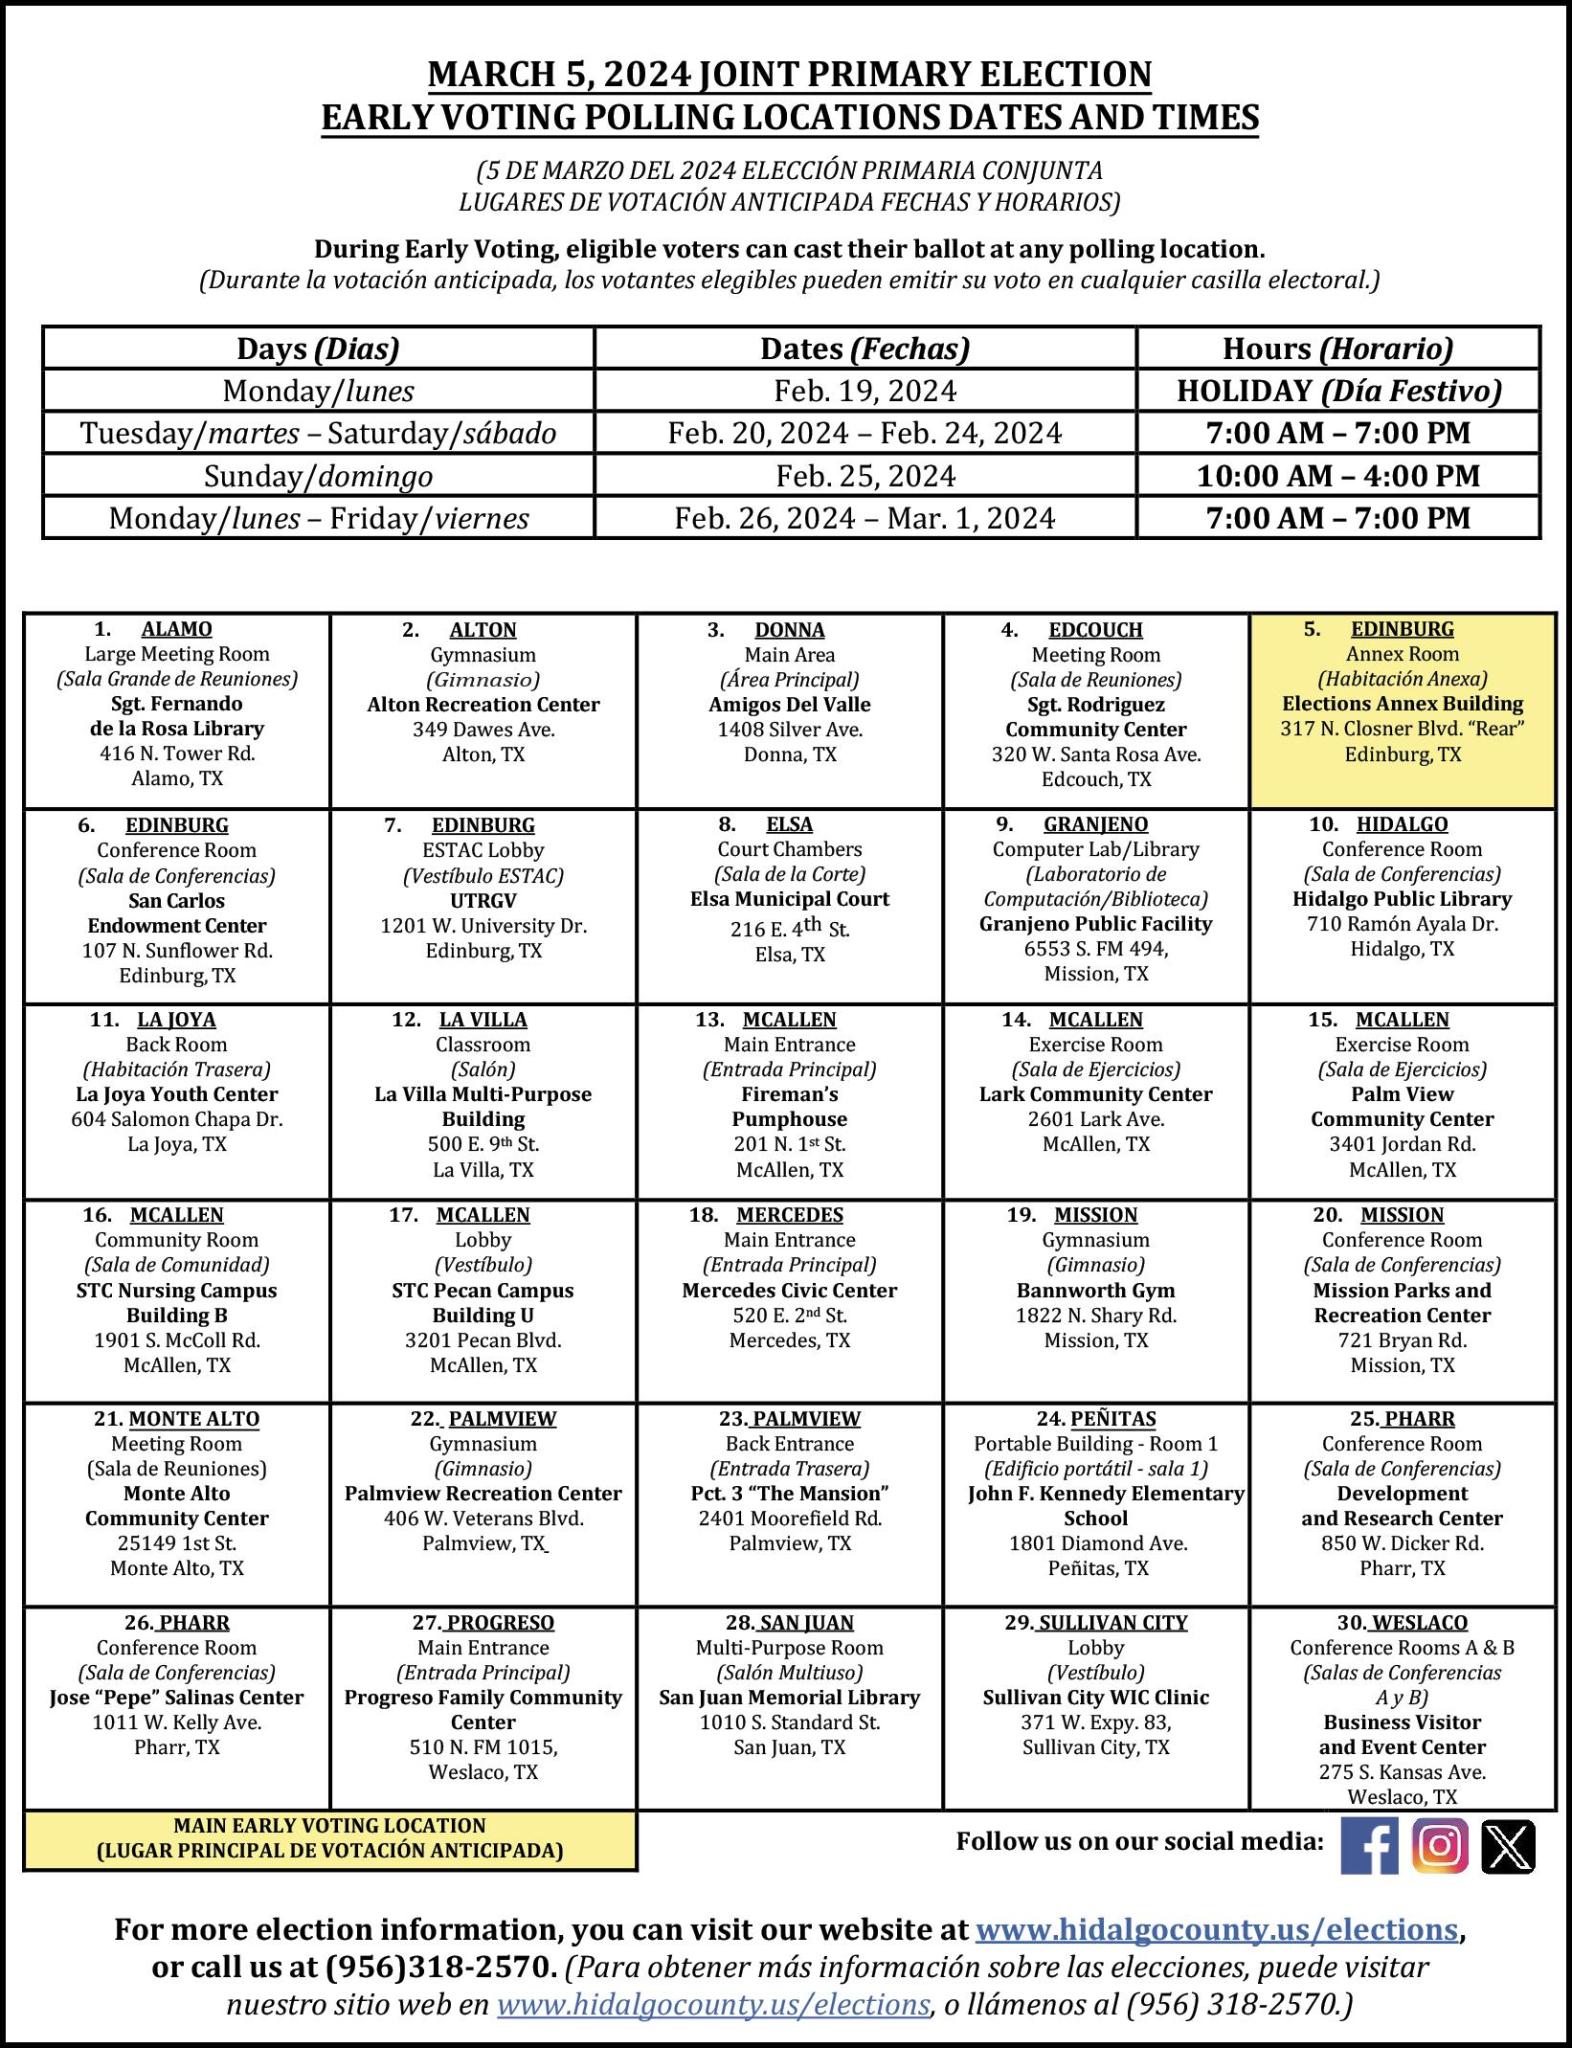 Polling locations for early voting in Hidalgo County. Source: Hidalgo County